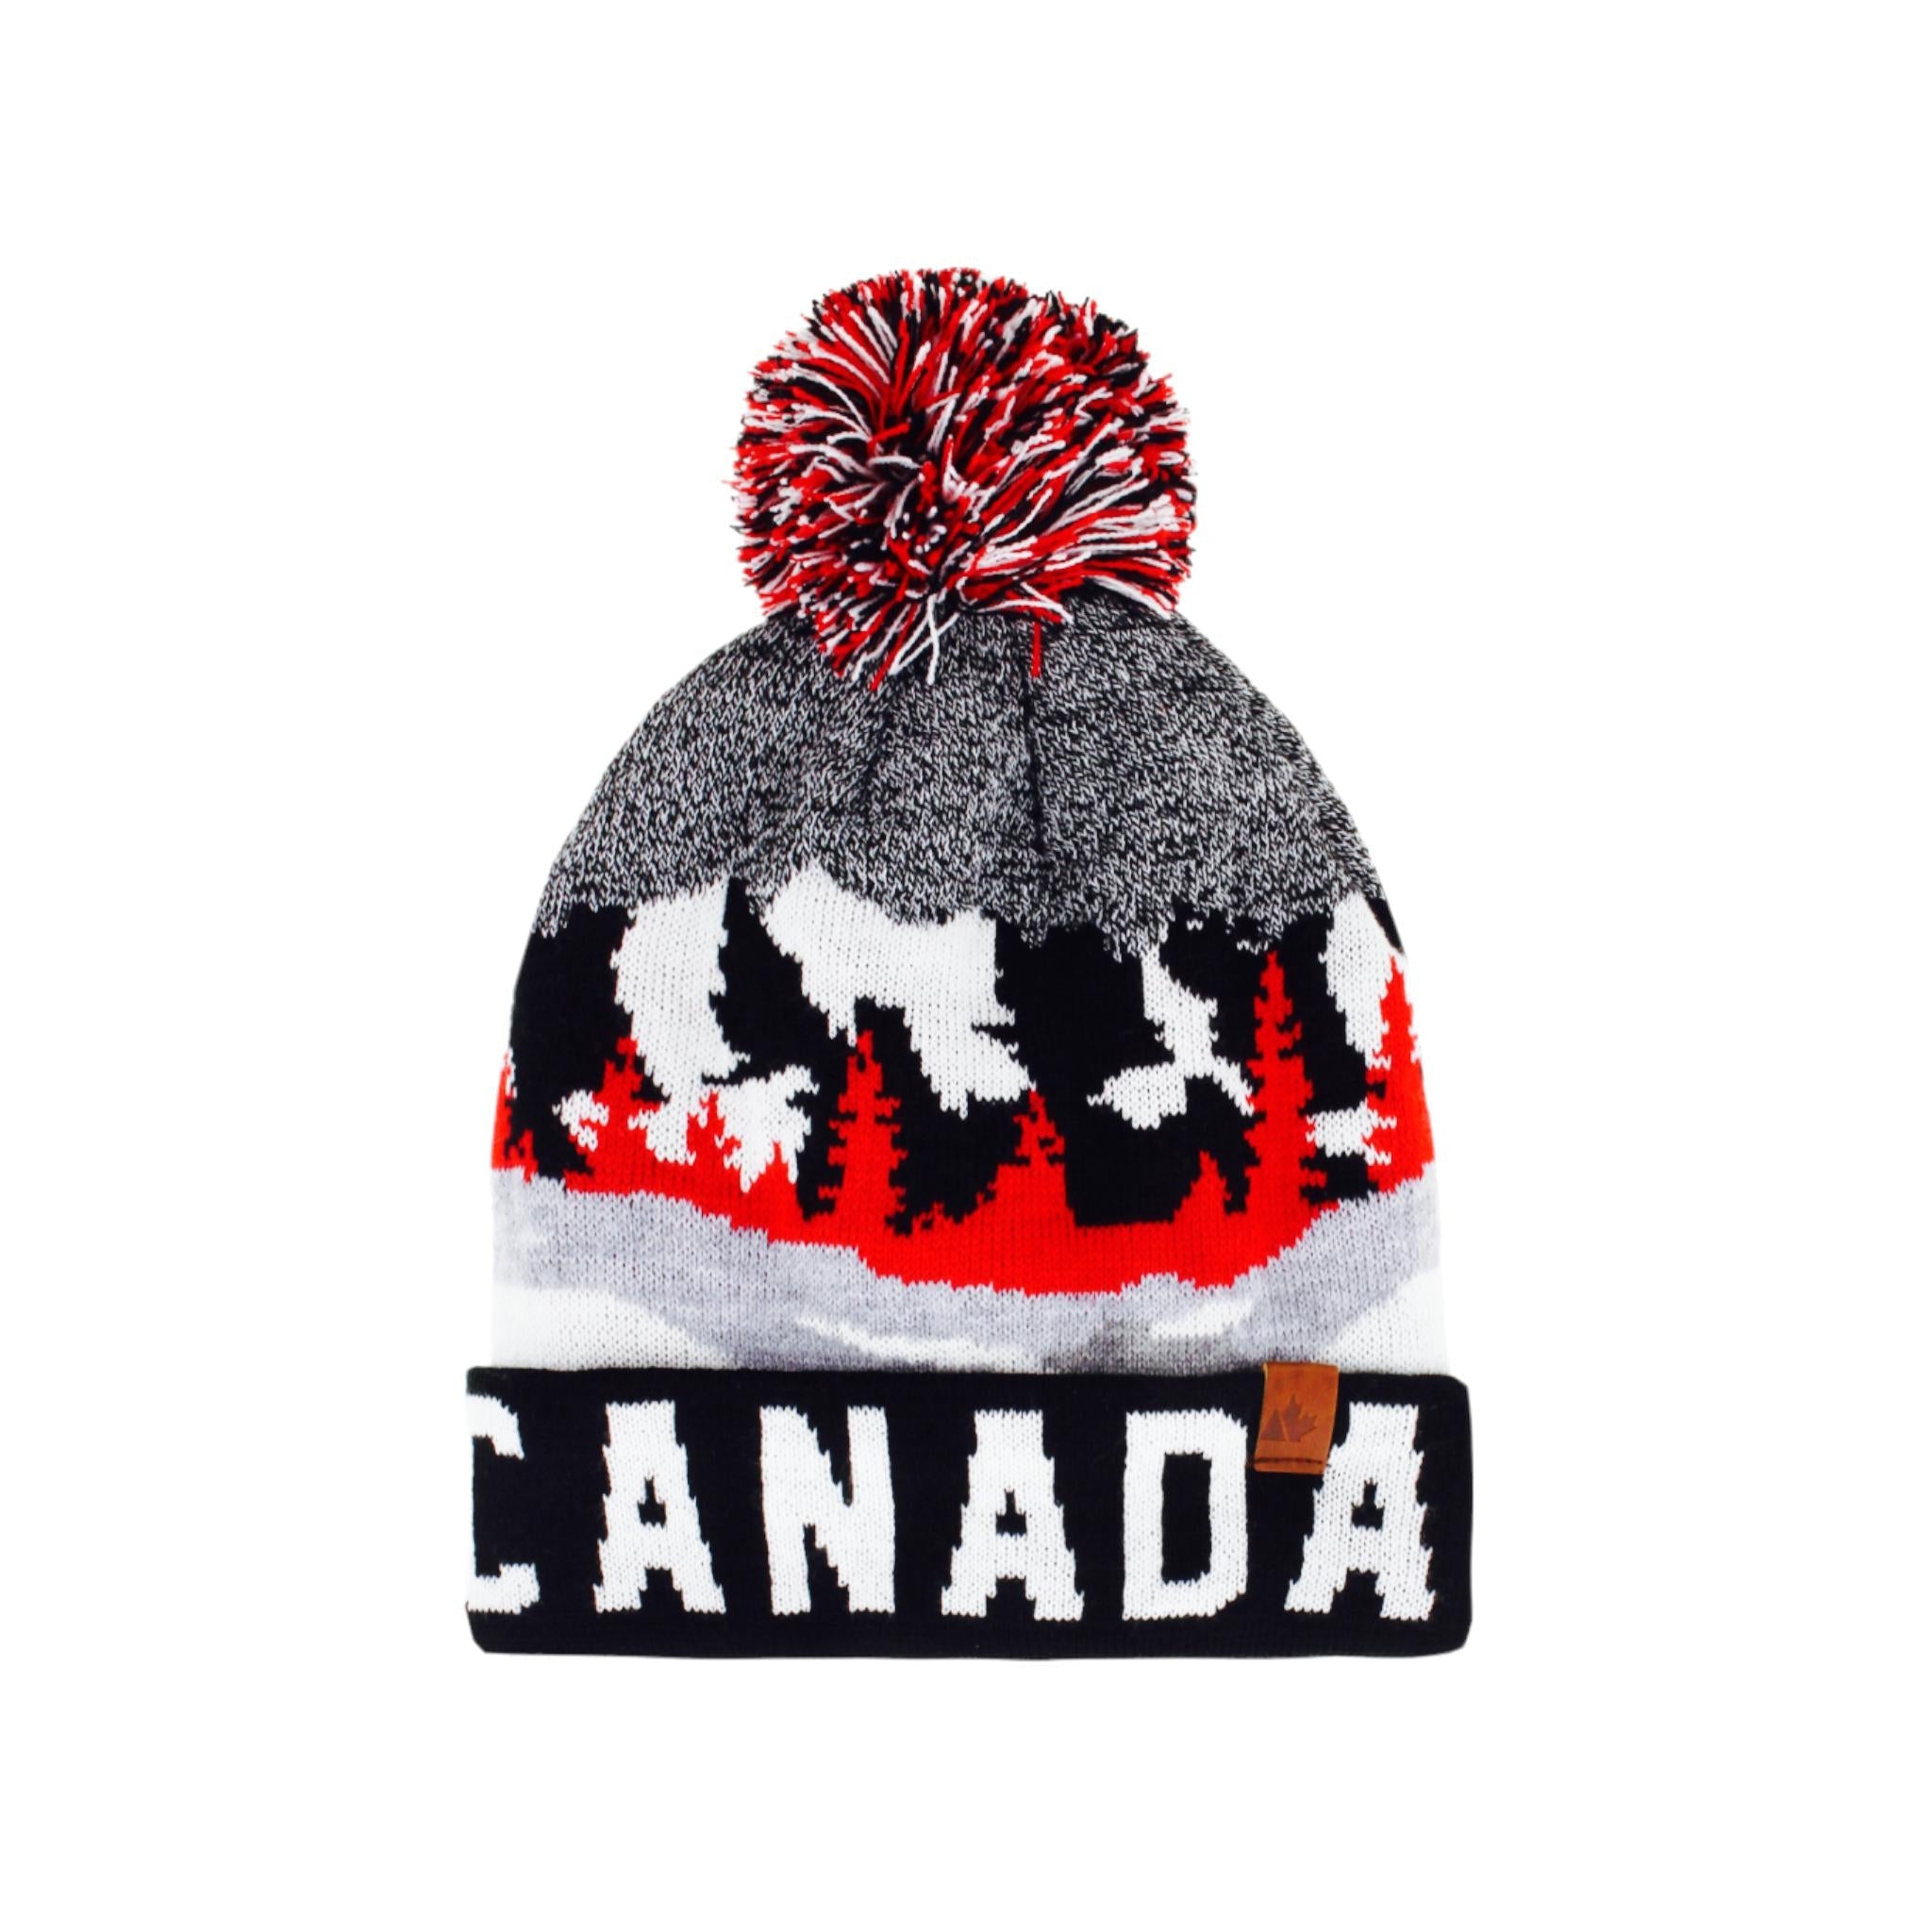 CANADA ADULT FLEECE LINED HAT WITH SCENIC LANDSCAPE W/ POMPOM